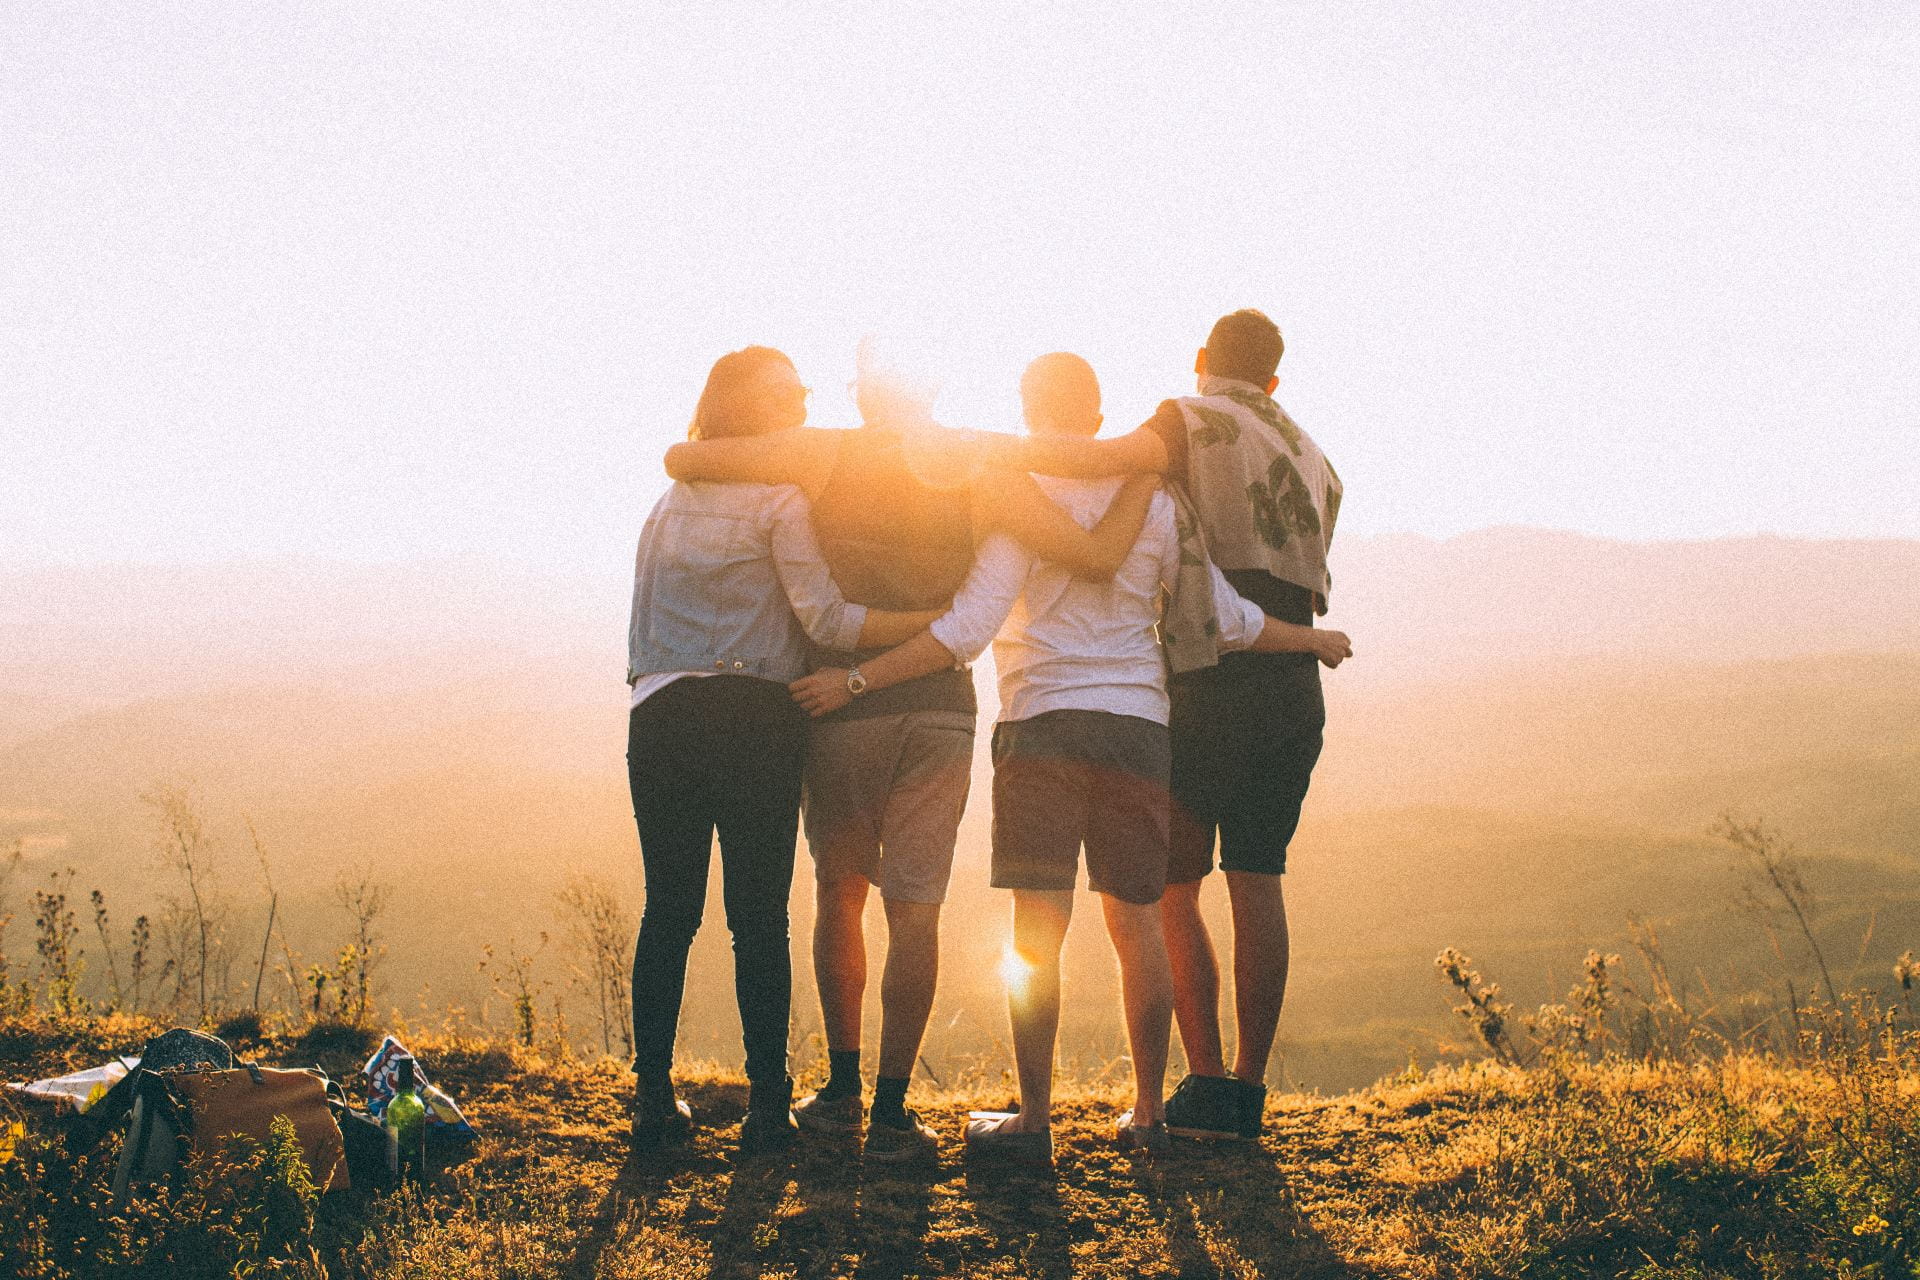 Four people linking arms looking at sunset.